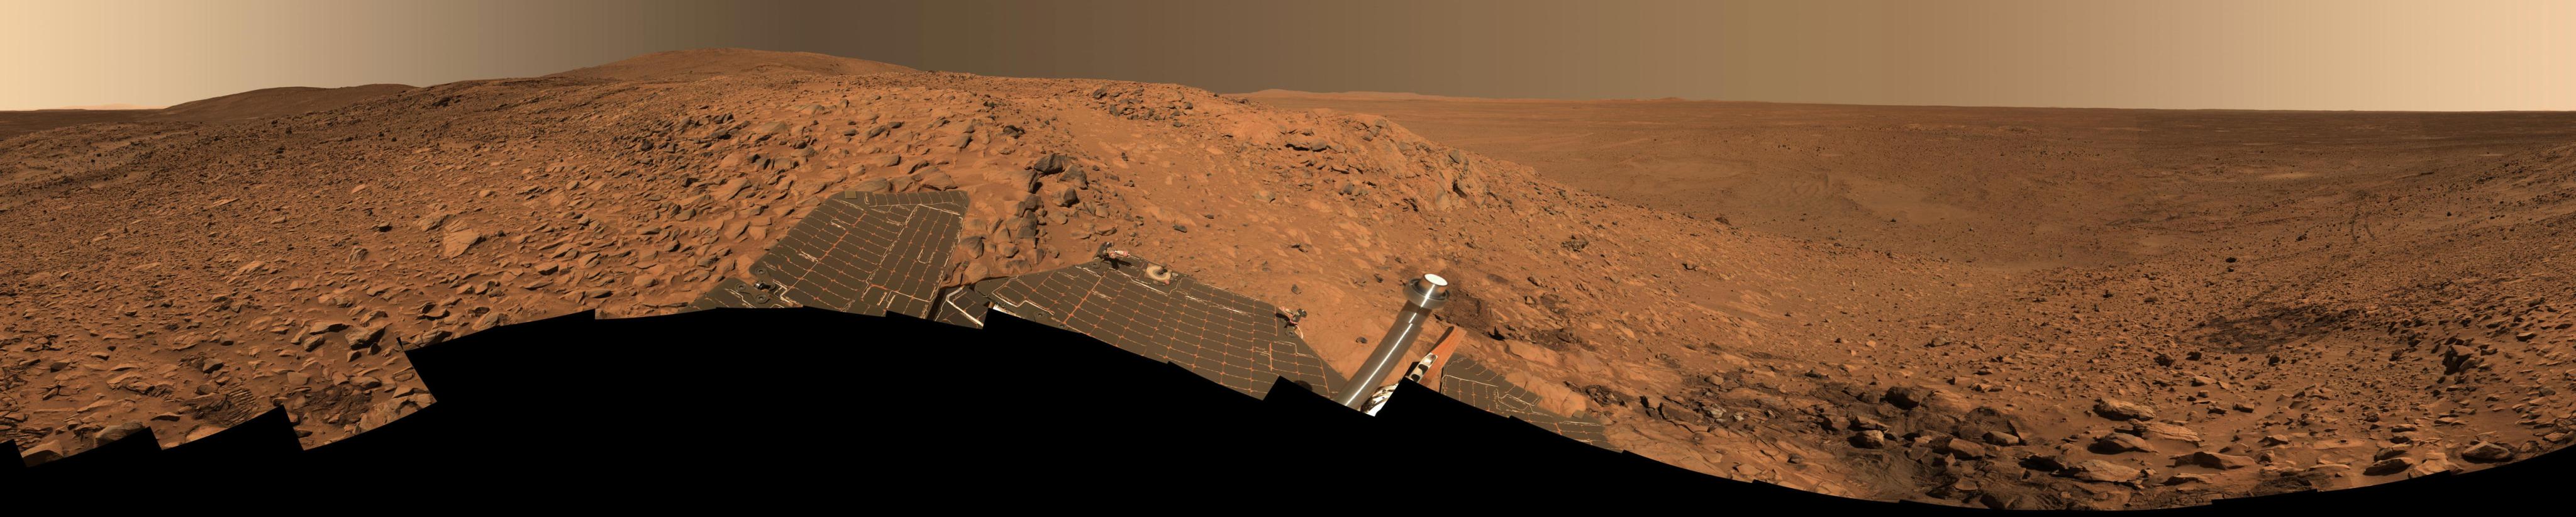 This stunning image mosaic of the "Columbia Hills" is the first 360-degree panorama taken since the Mars Exploration Rover Spirit arrived at the hills over a month ago.